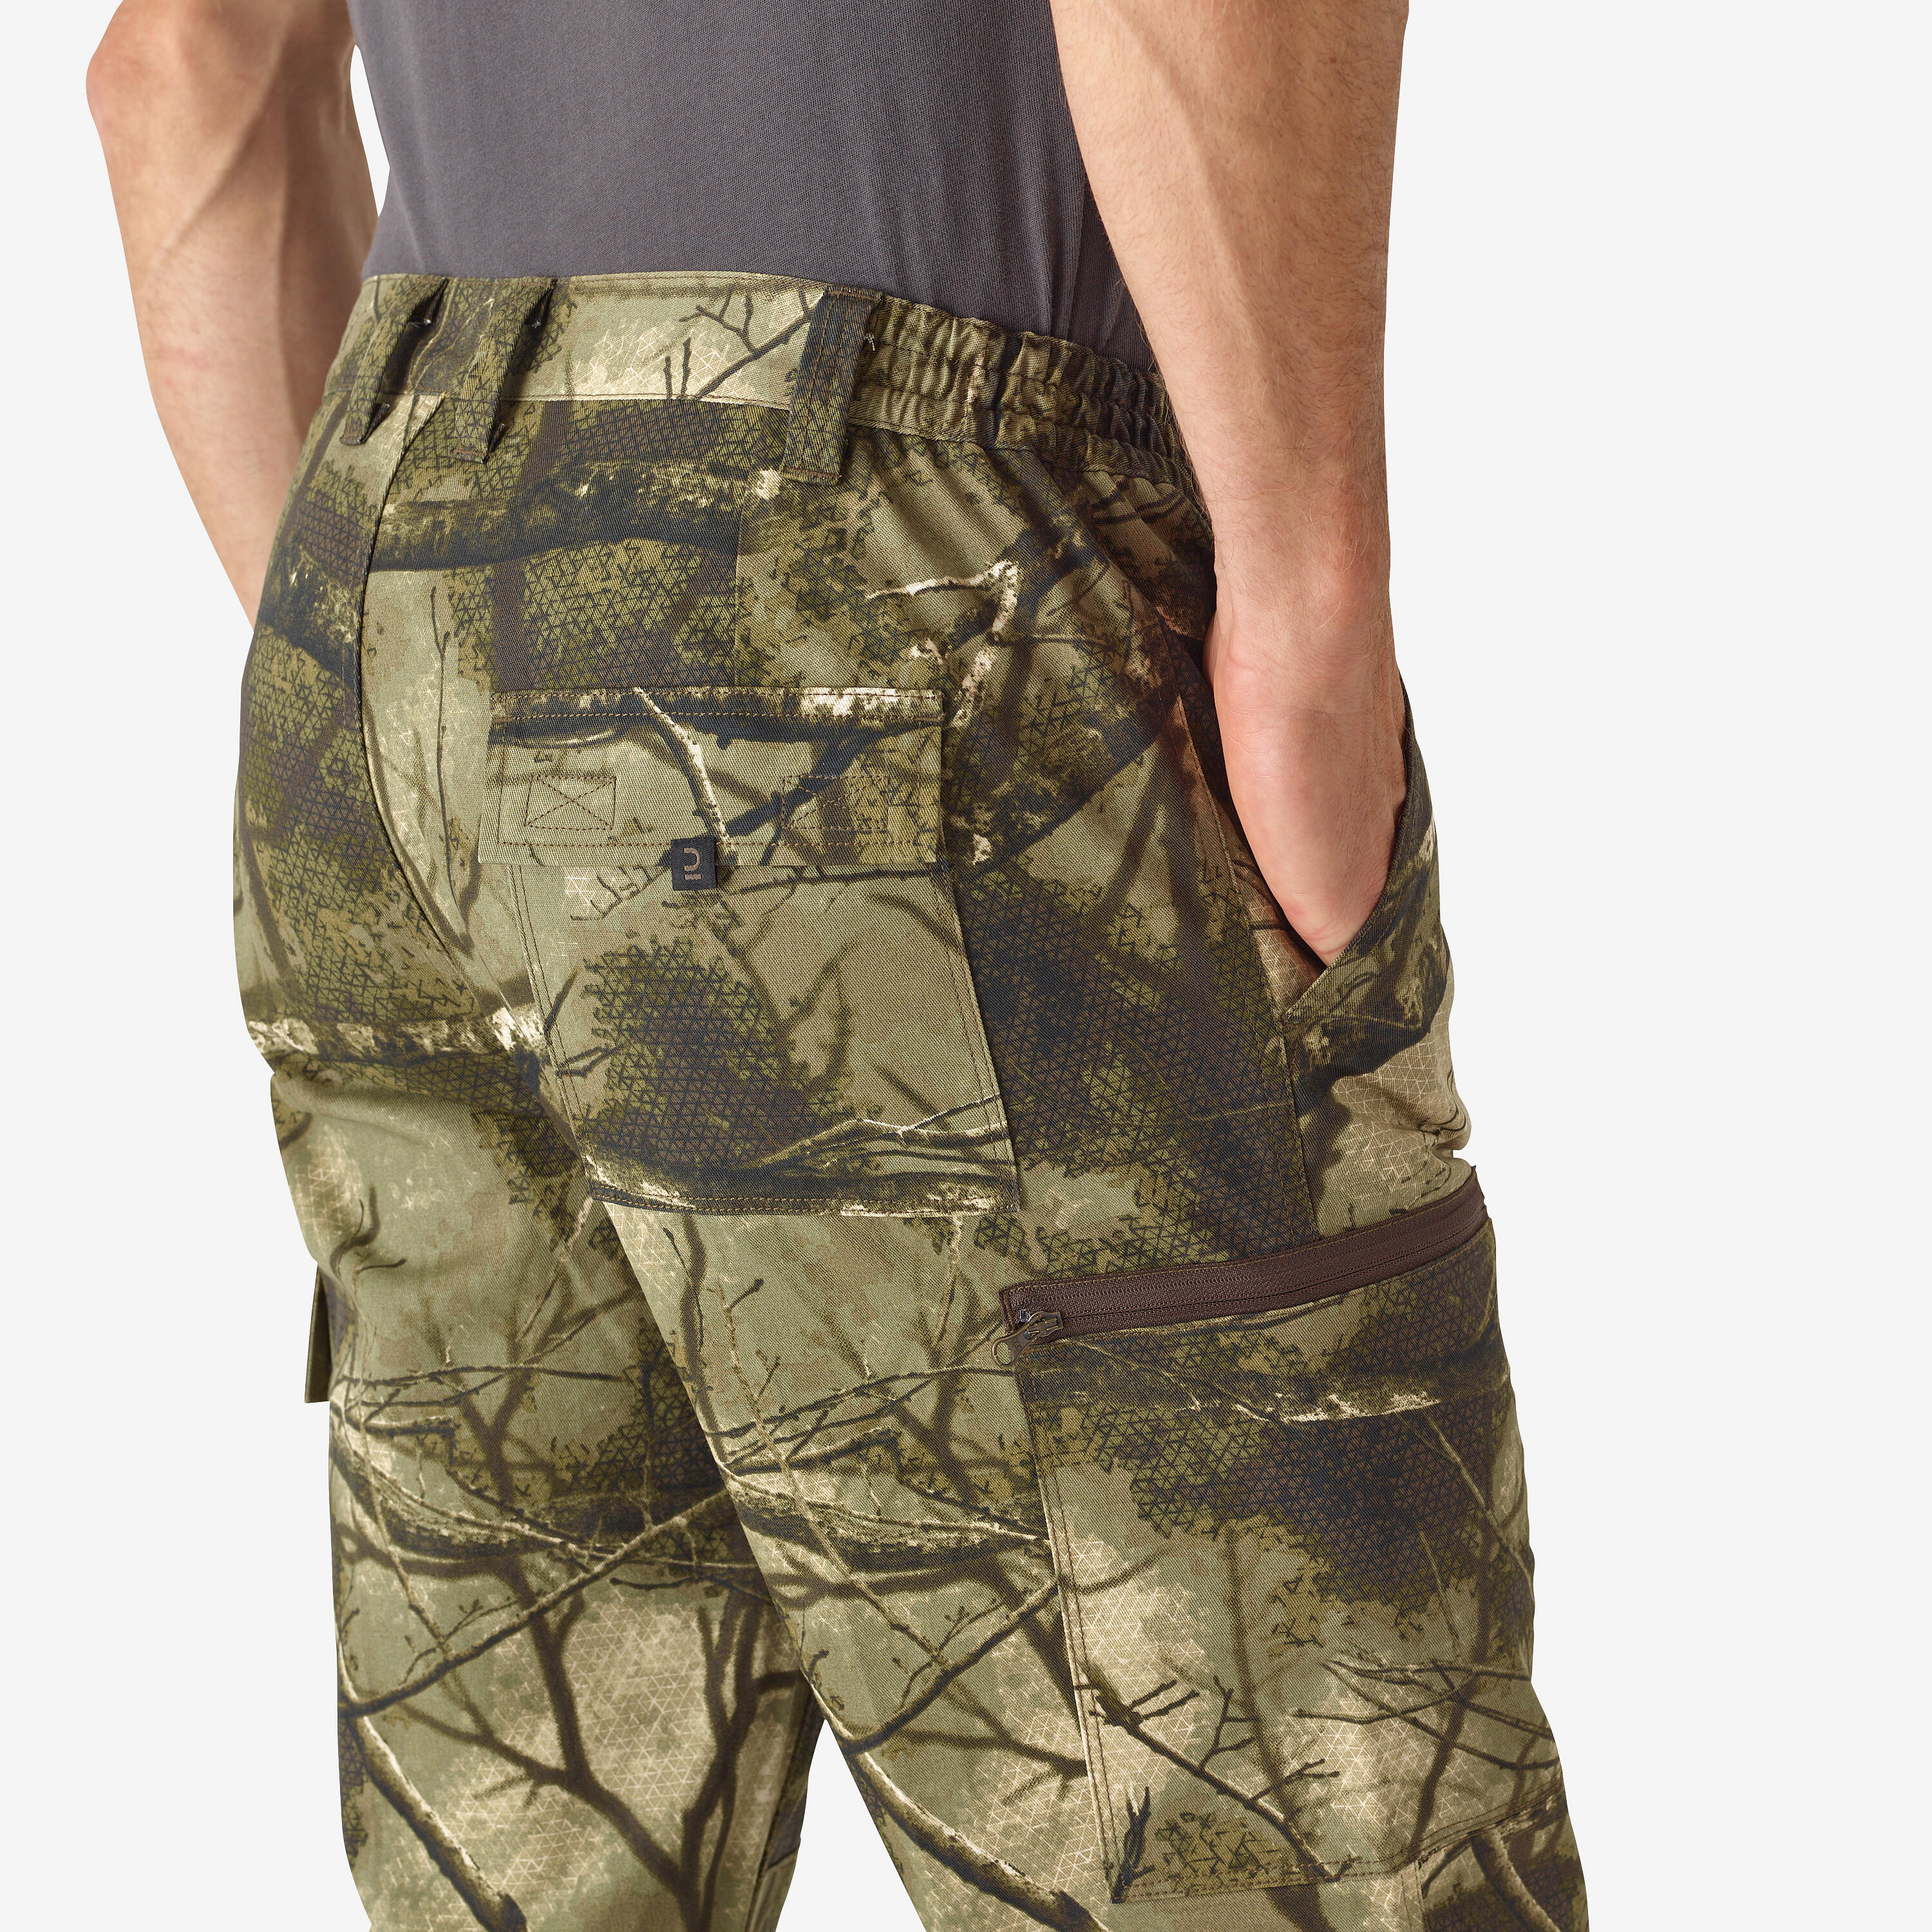 HUNTING BREATHABLE SILENT COTTON TROUSERS 100 TREEMETIC CAMOUFLAGE 3/6